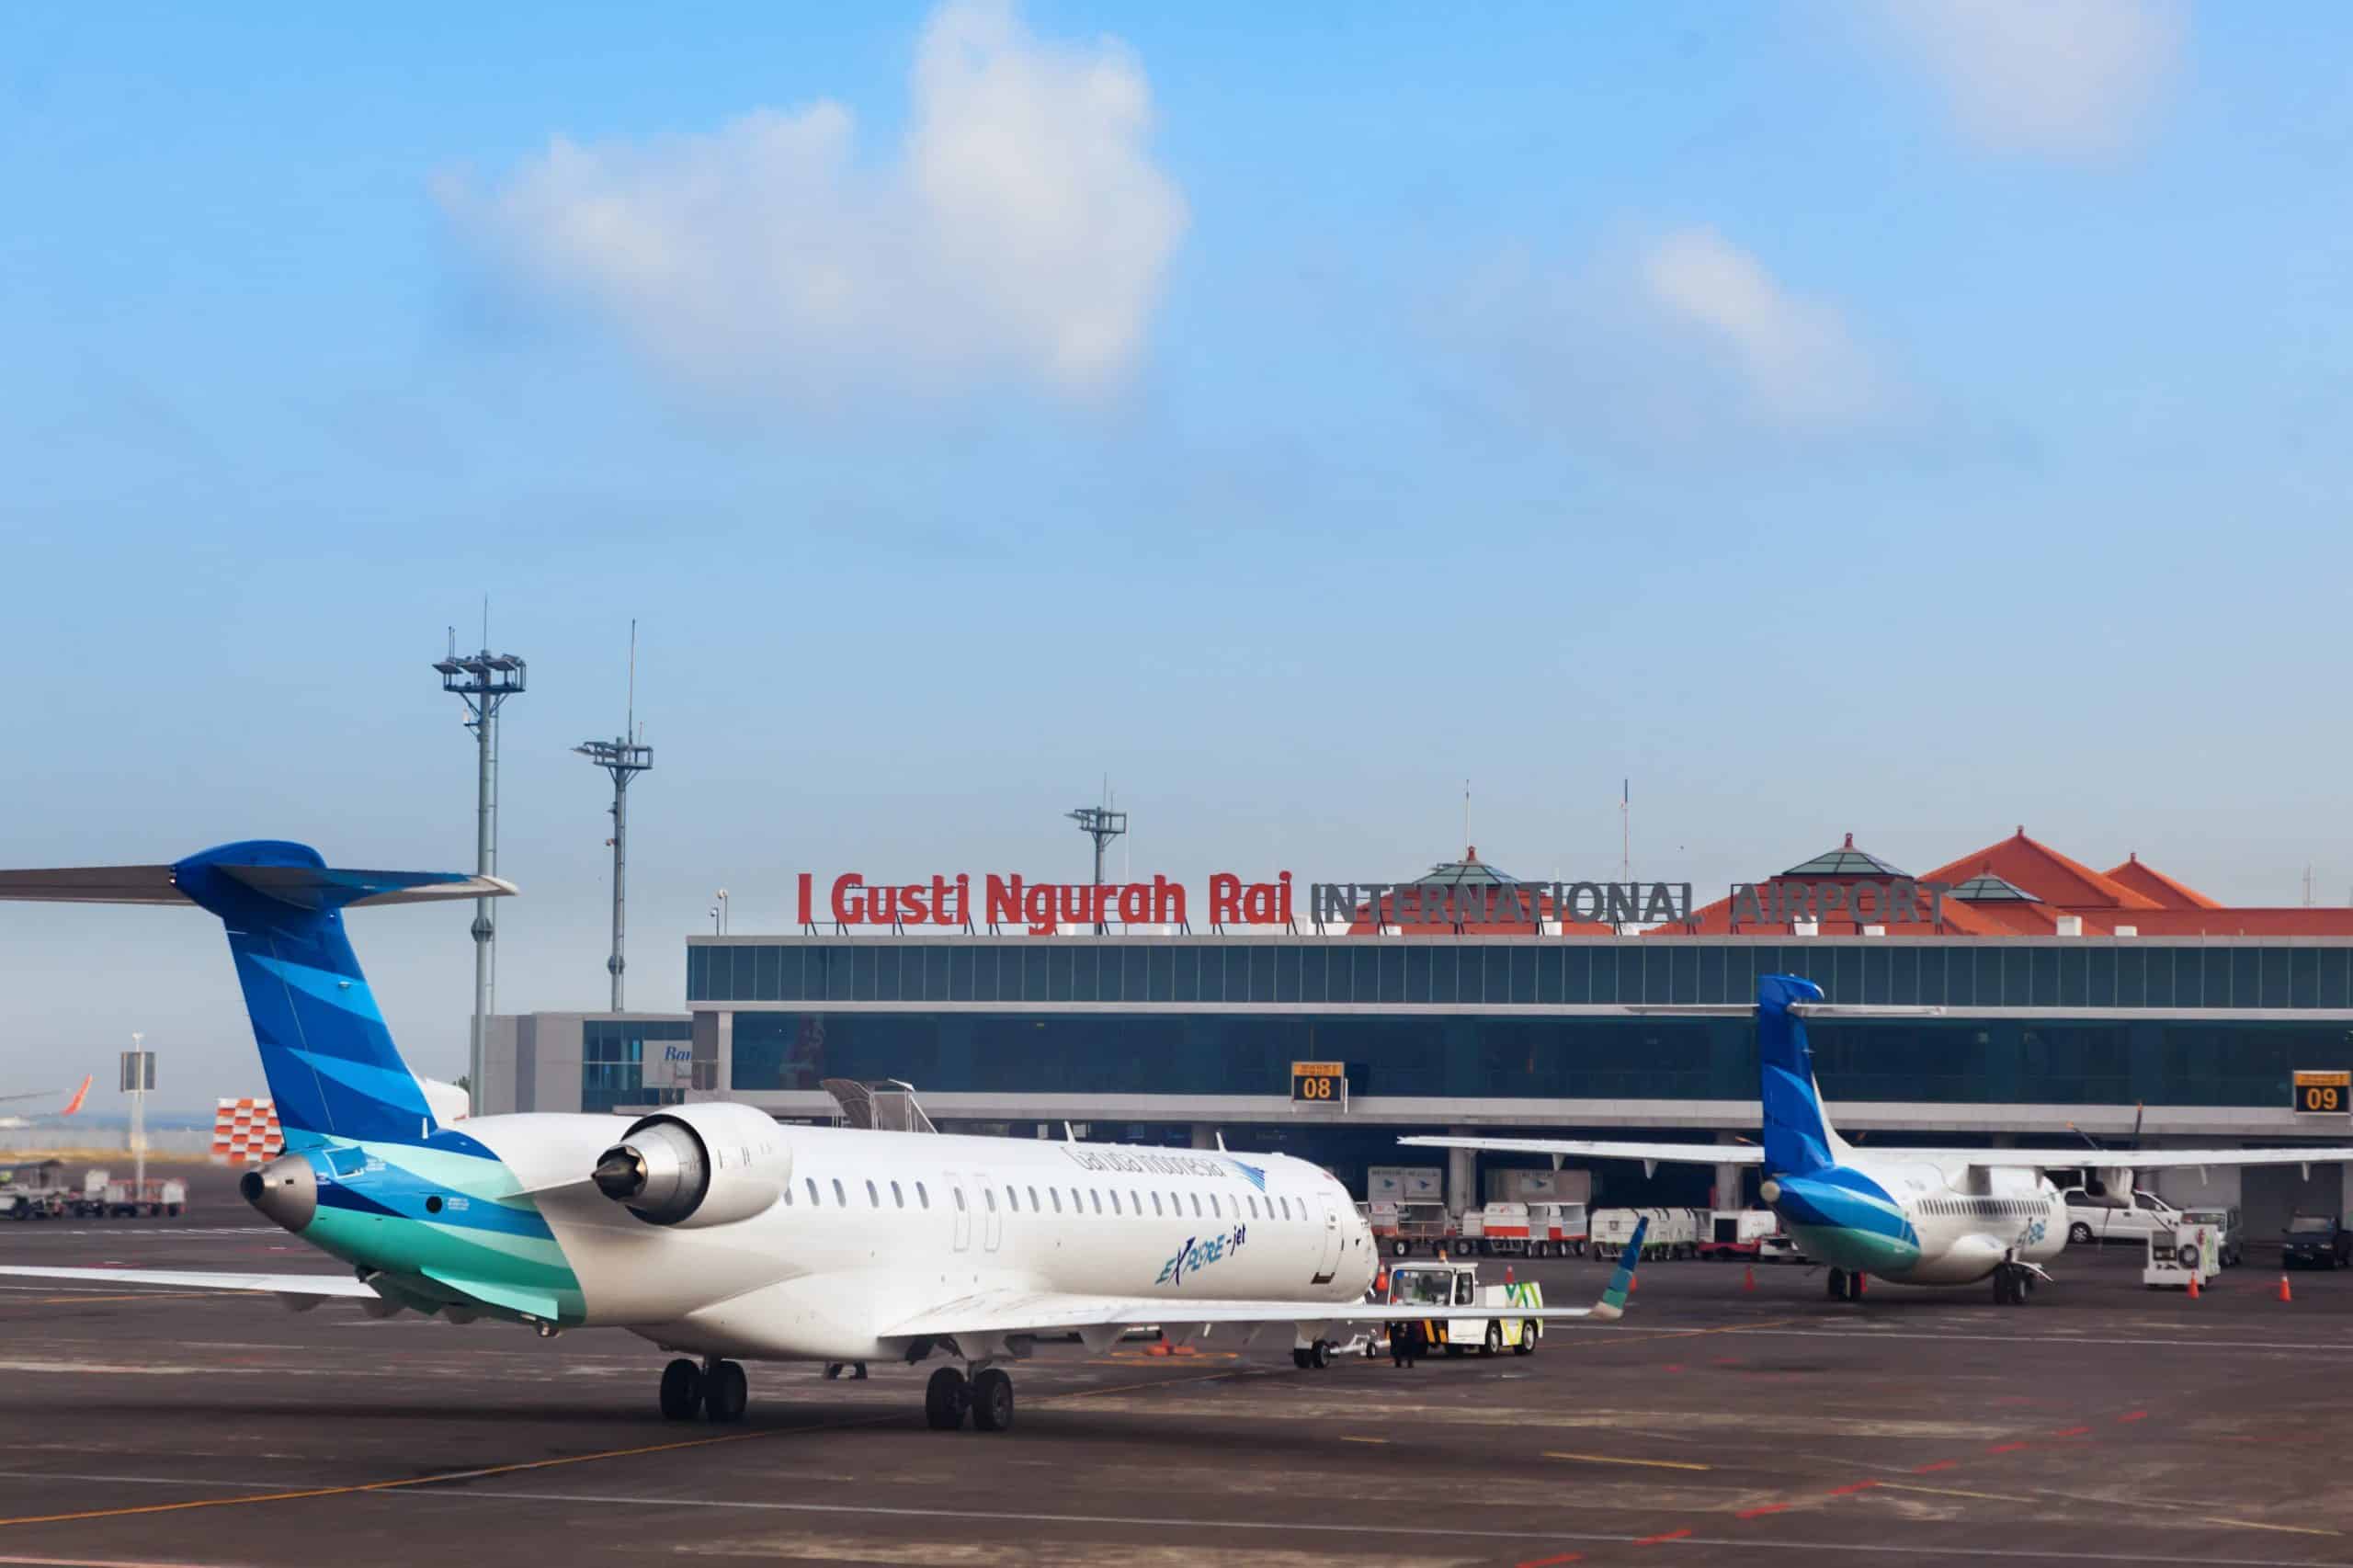 More Flight Services Will Simplify European Visitors' Access to Bali